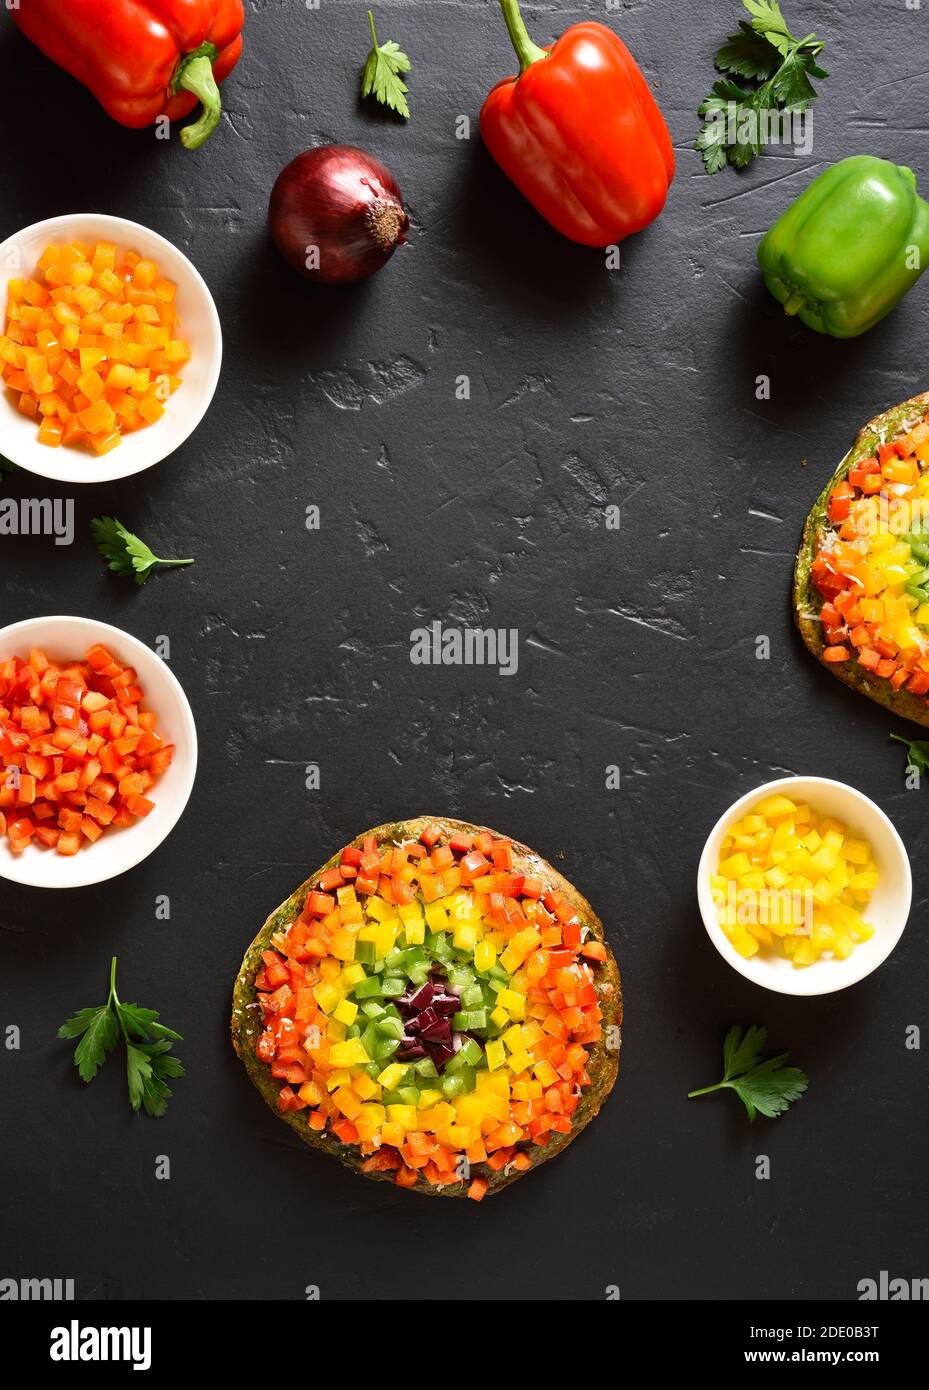 Frame of rainbow veggie bell peppers pizza and ingredients on black stone background with free text space. Vegetarian vegan or healthy food concept. G Stock Photo